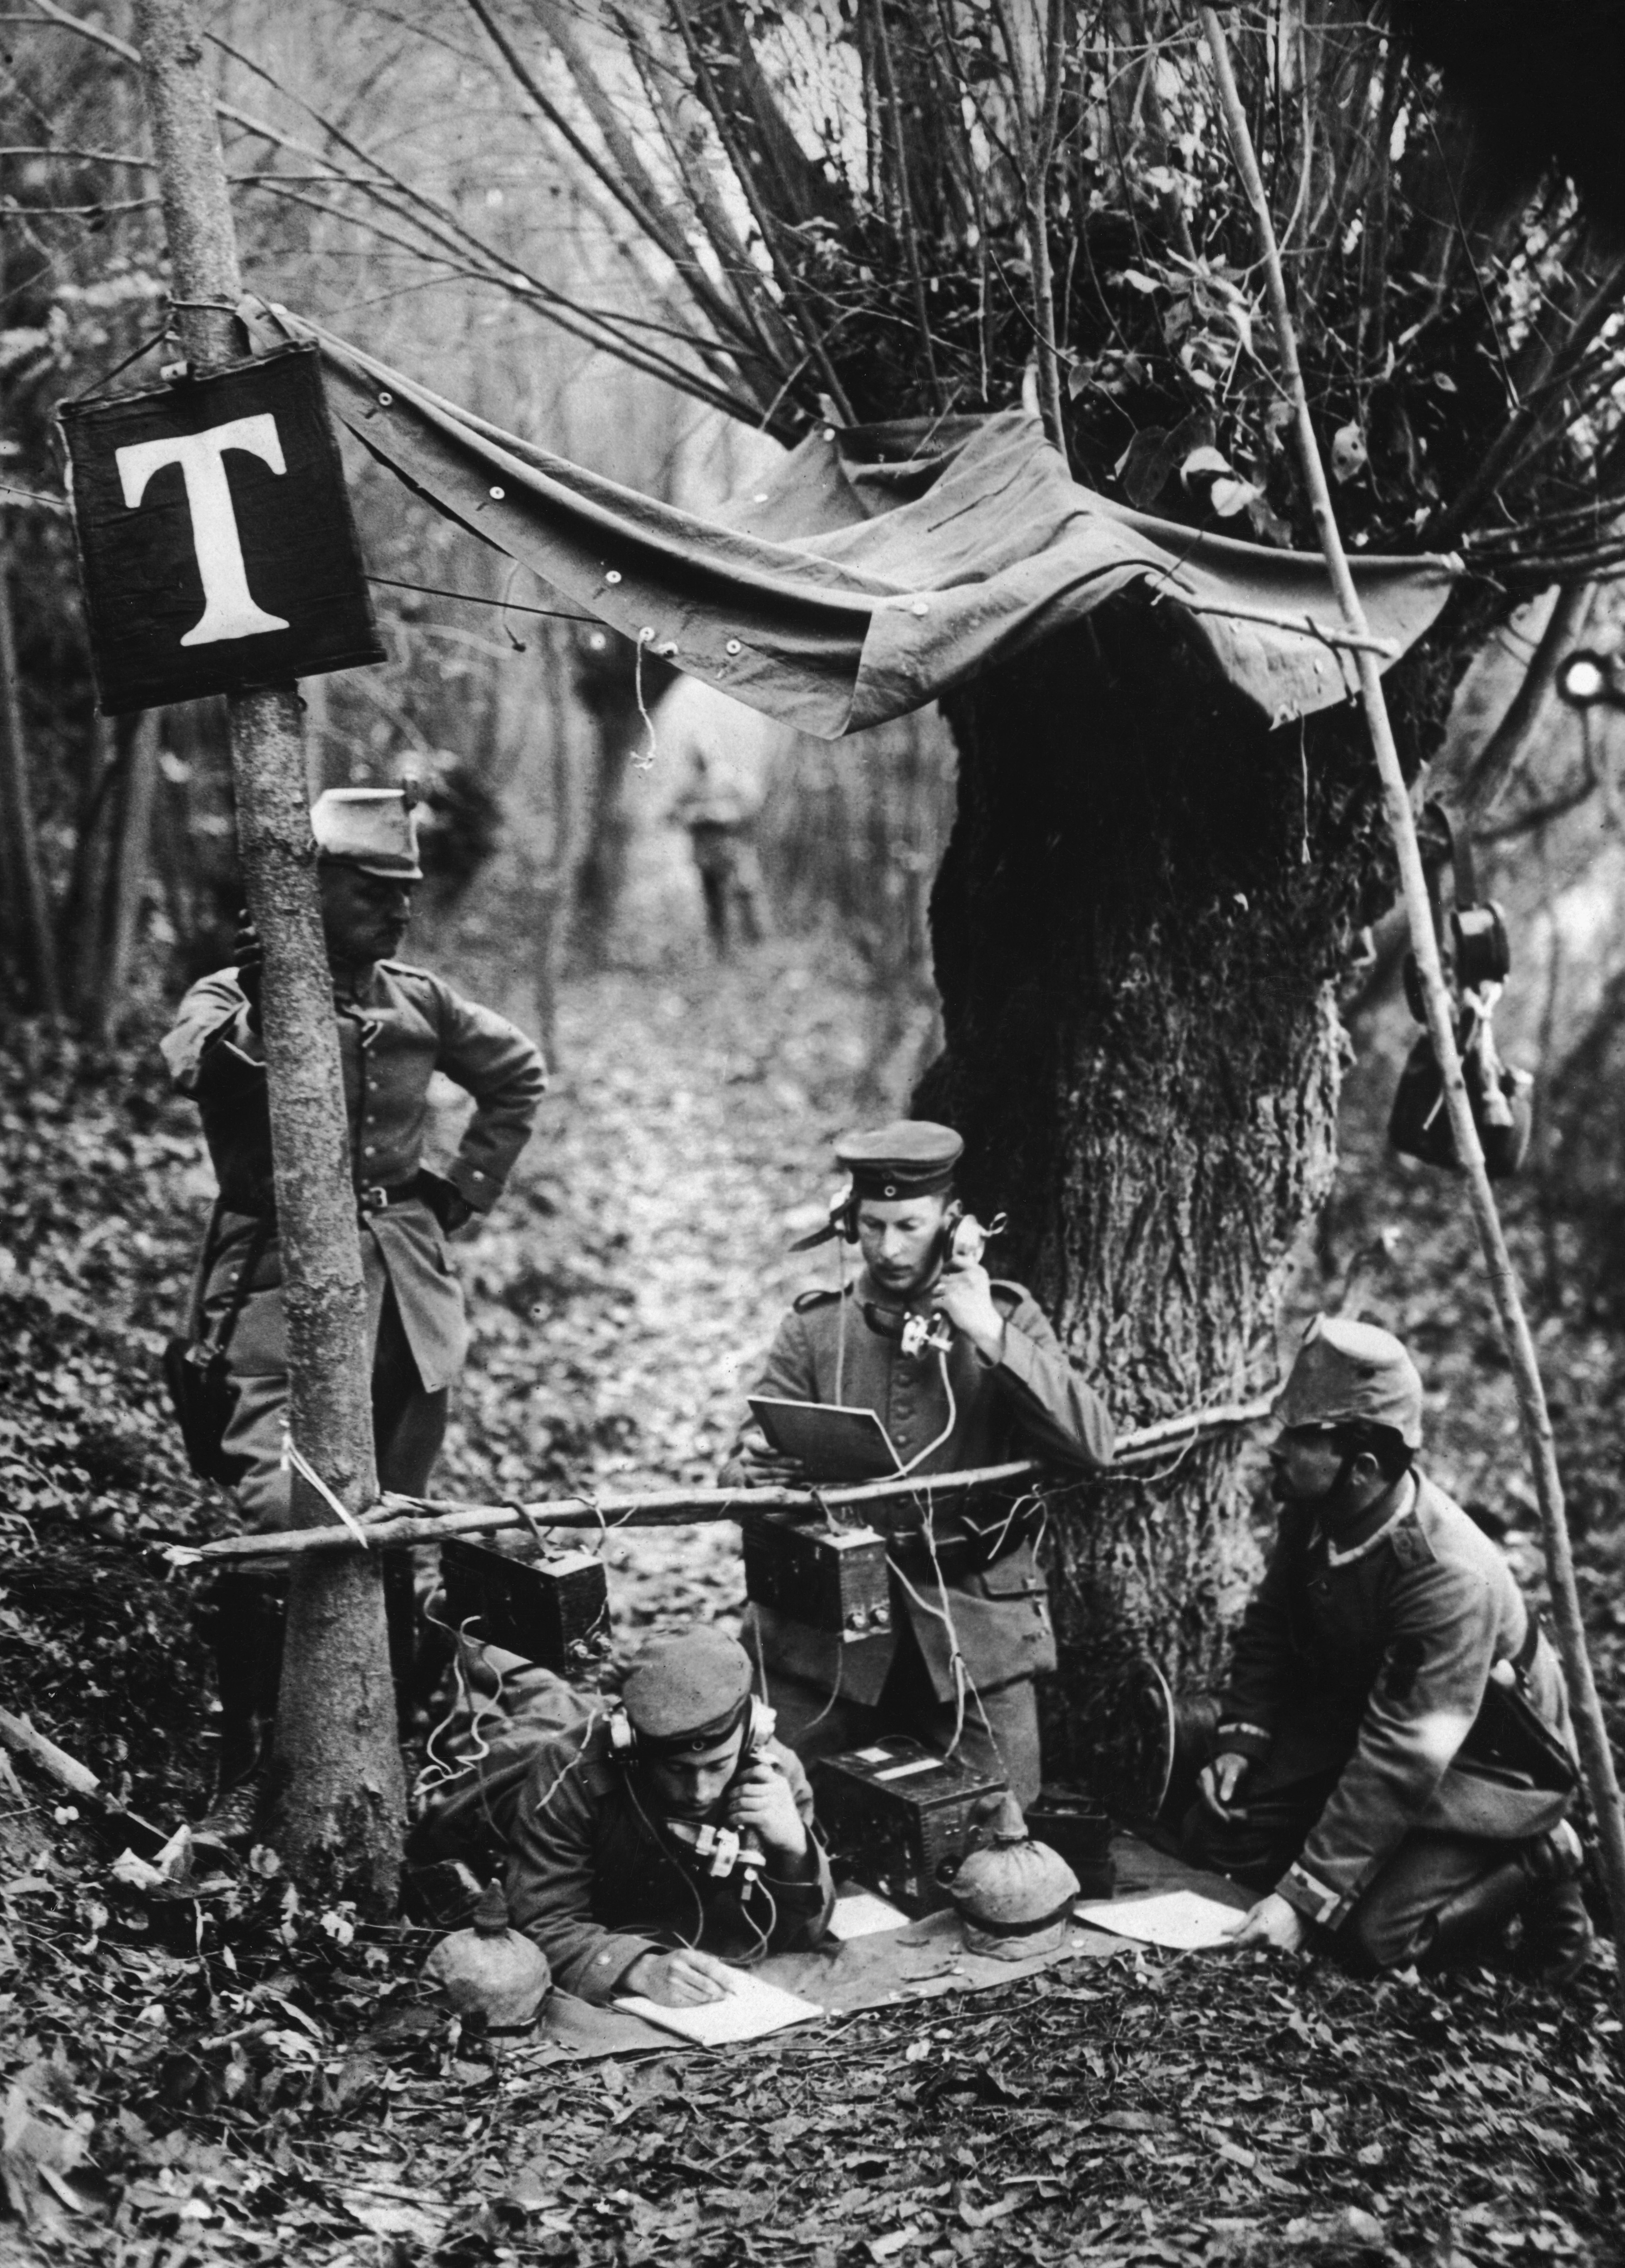 1916 A German field telephone station in the Aisne department of northern France during World War I.